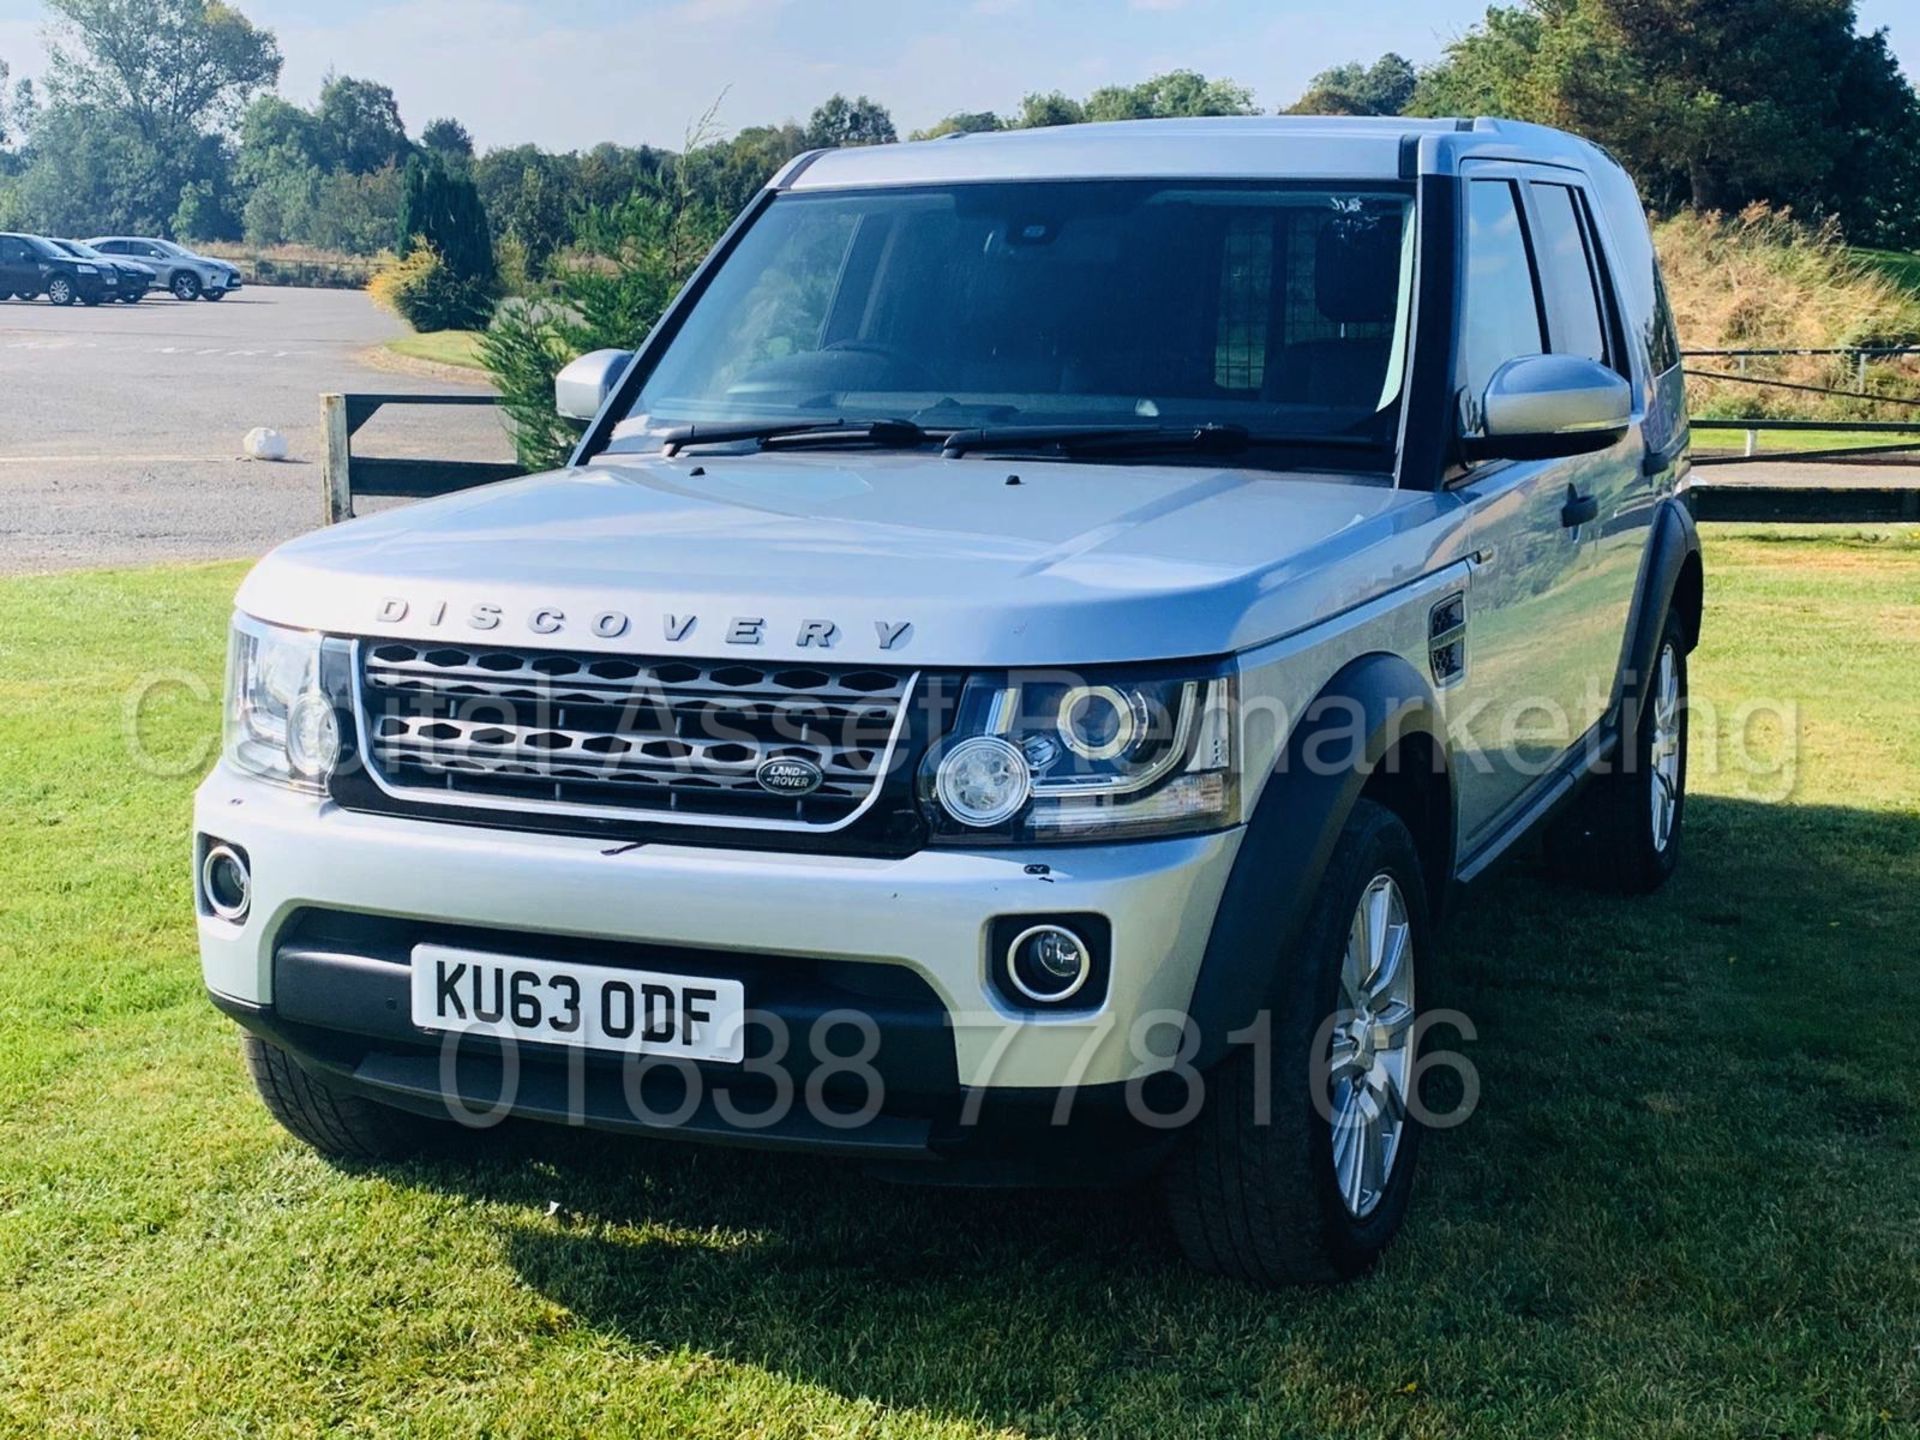 LAND ROVER DISCOVERY *XS EDITION* (2014) '3.0 SDV6 - 255 BHP - 8 SPEED AUTO' *LEATHER & SAT NAV* - Image 6 of 50